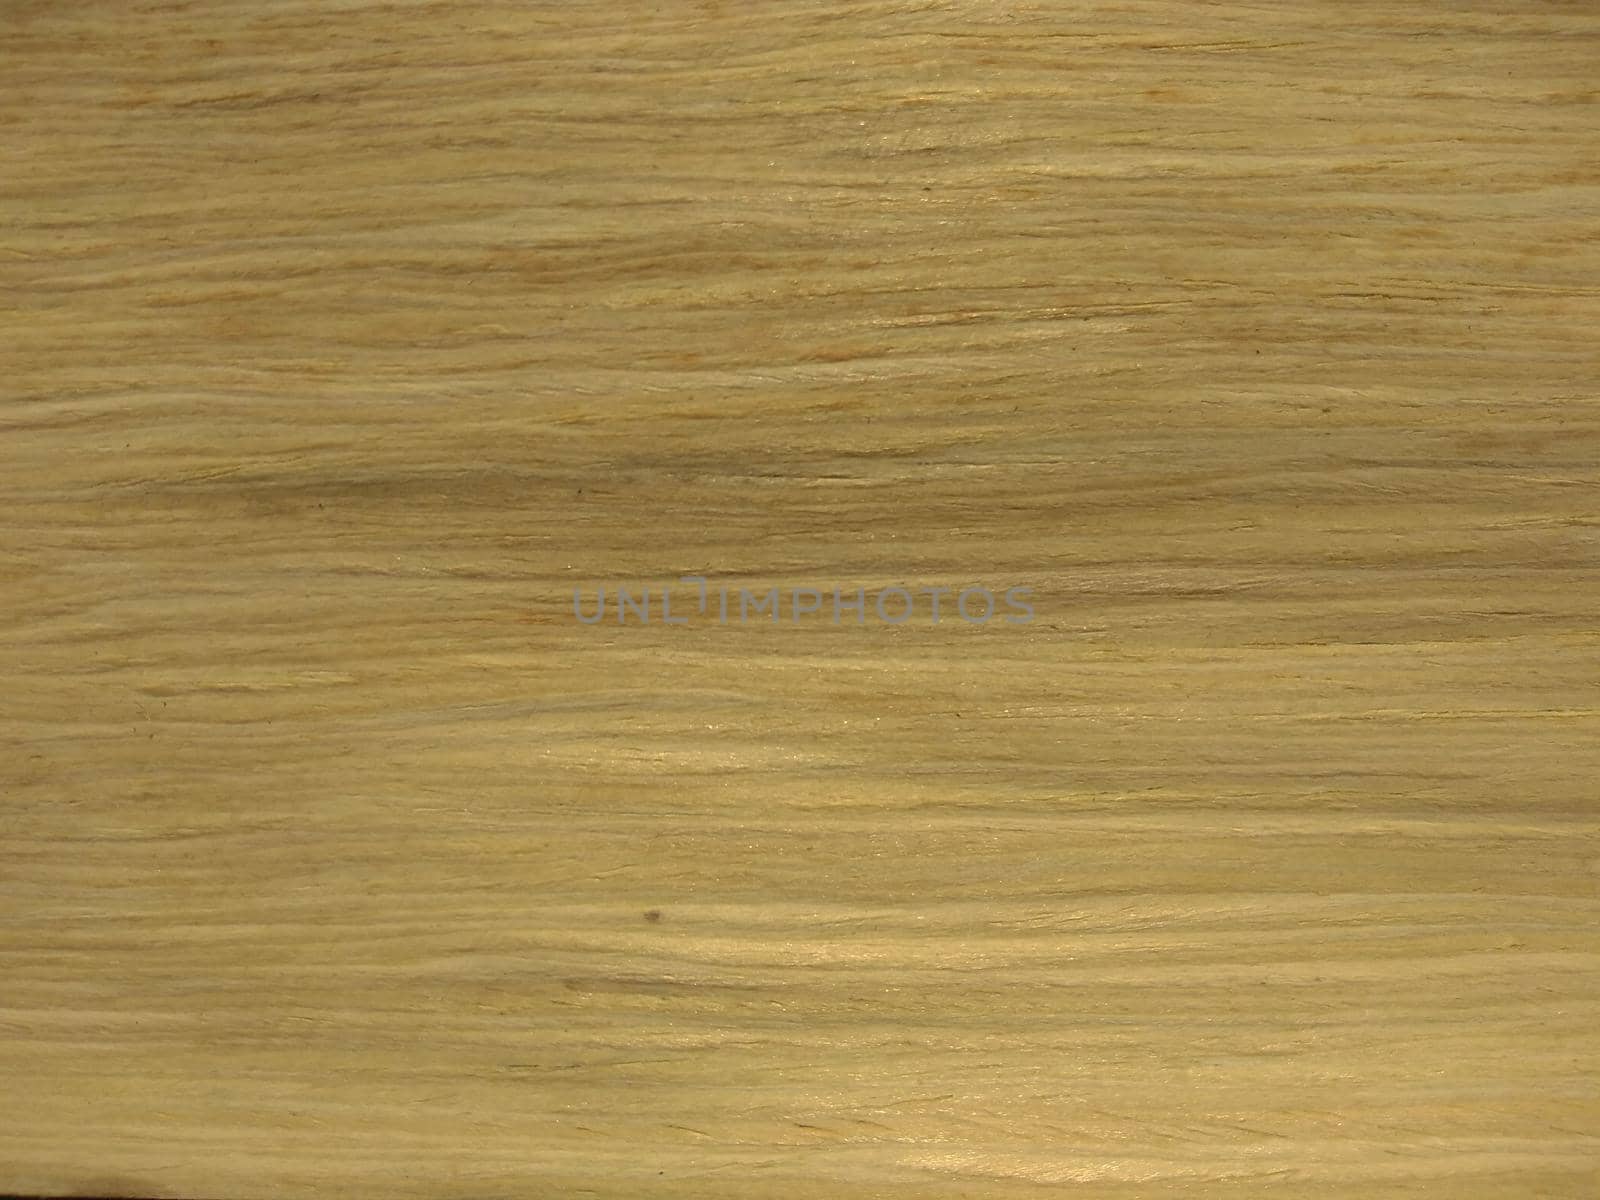 european white ash quarter wood texture background. veneer surface for interior and exterior manufacturers use.